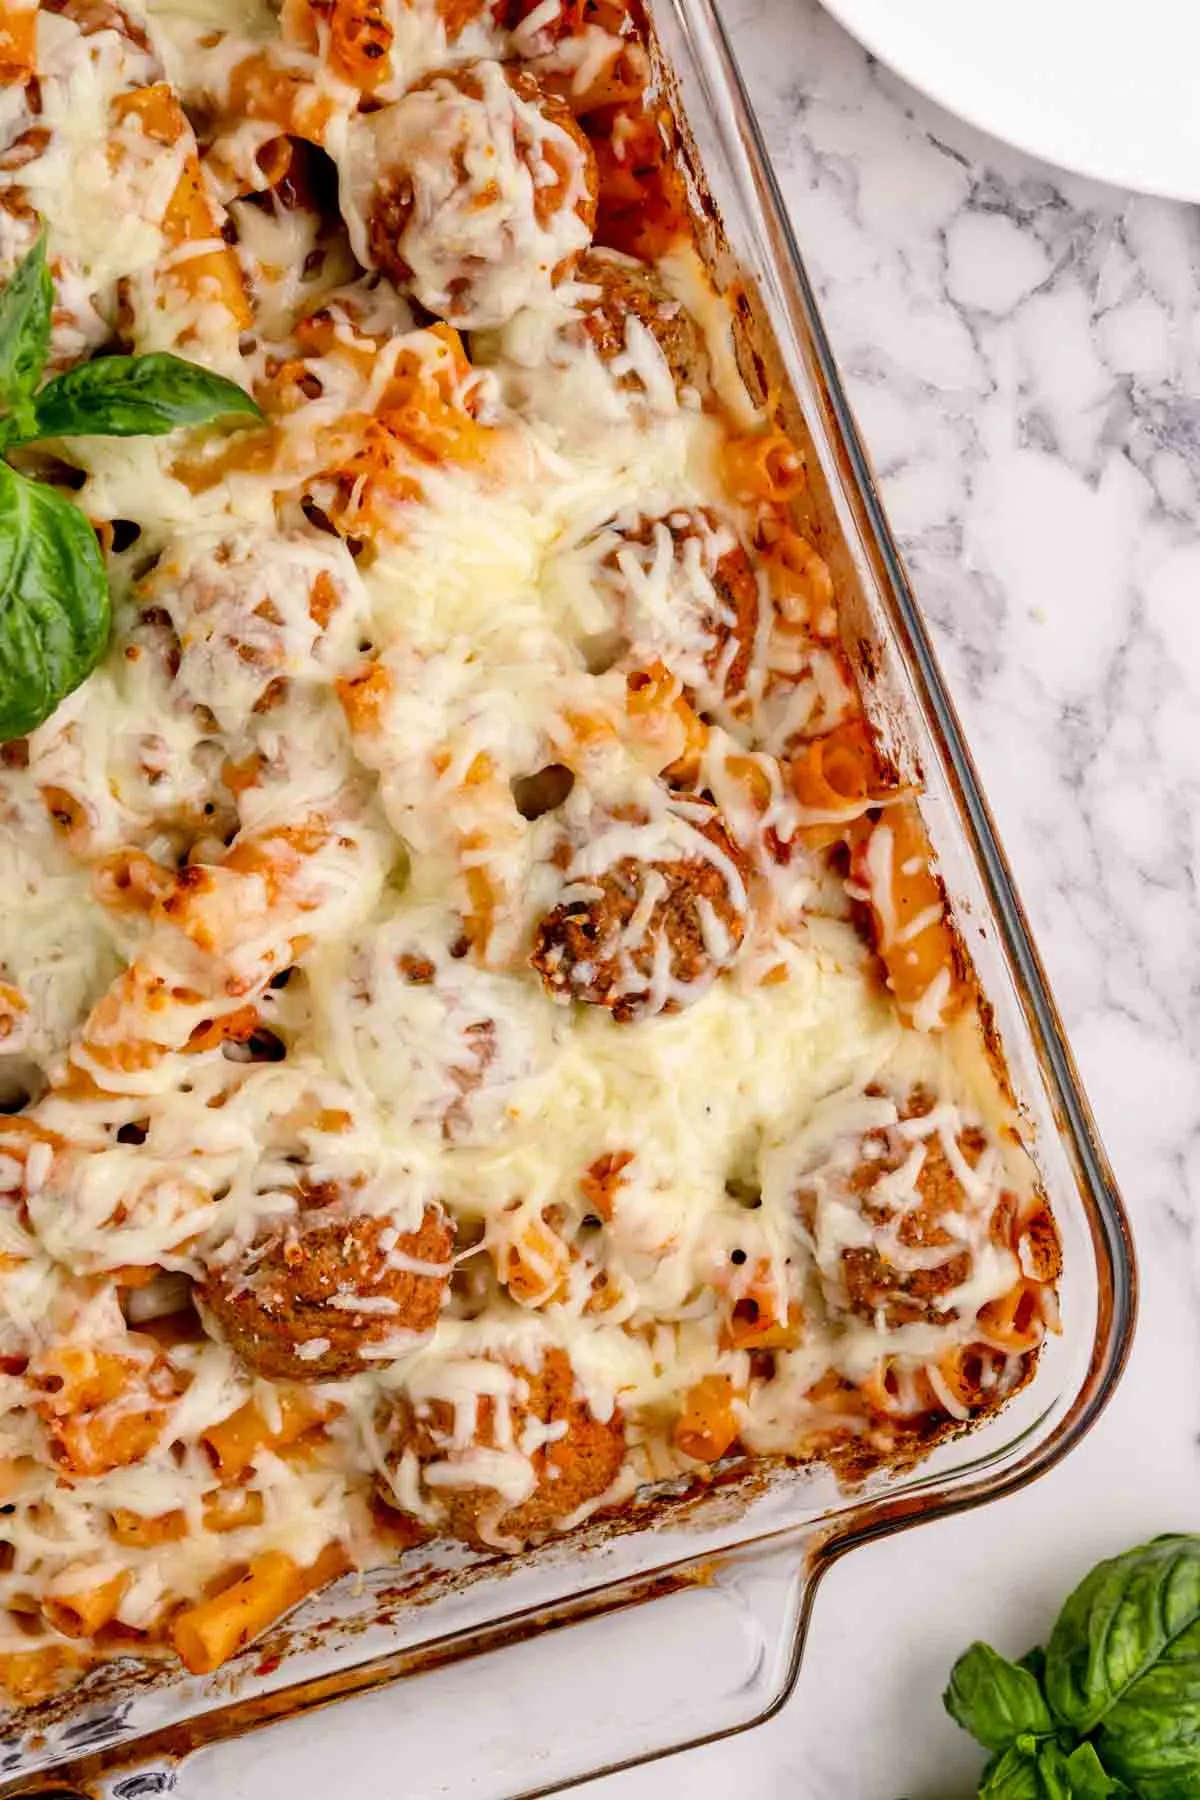 Dump and Bake Meatball Pasta Casserole is an easy dinner recipe with ziti noodles, chicken stock, pasta sauce, Italian seasoning and turkey meatballs all cooked together in one dish and then topped with mozzarella cheese.